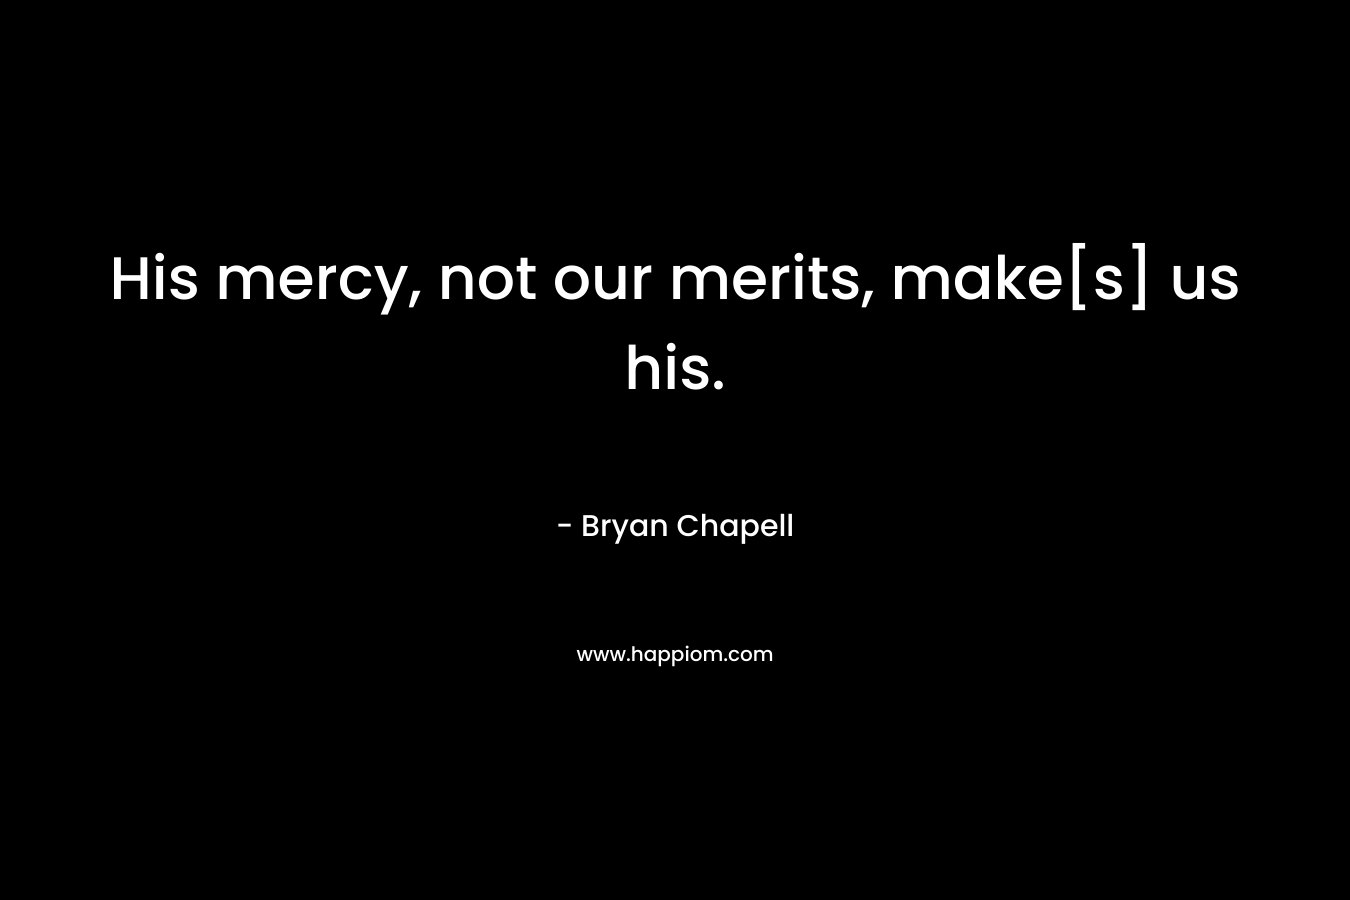 His mercy, not our merits, make[s] us his.